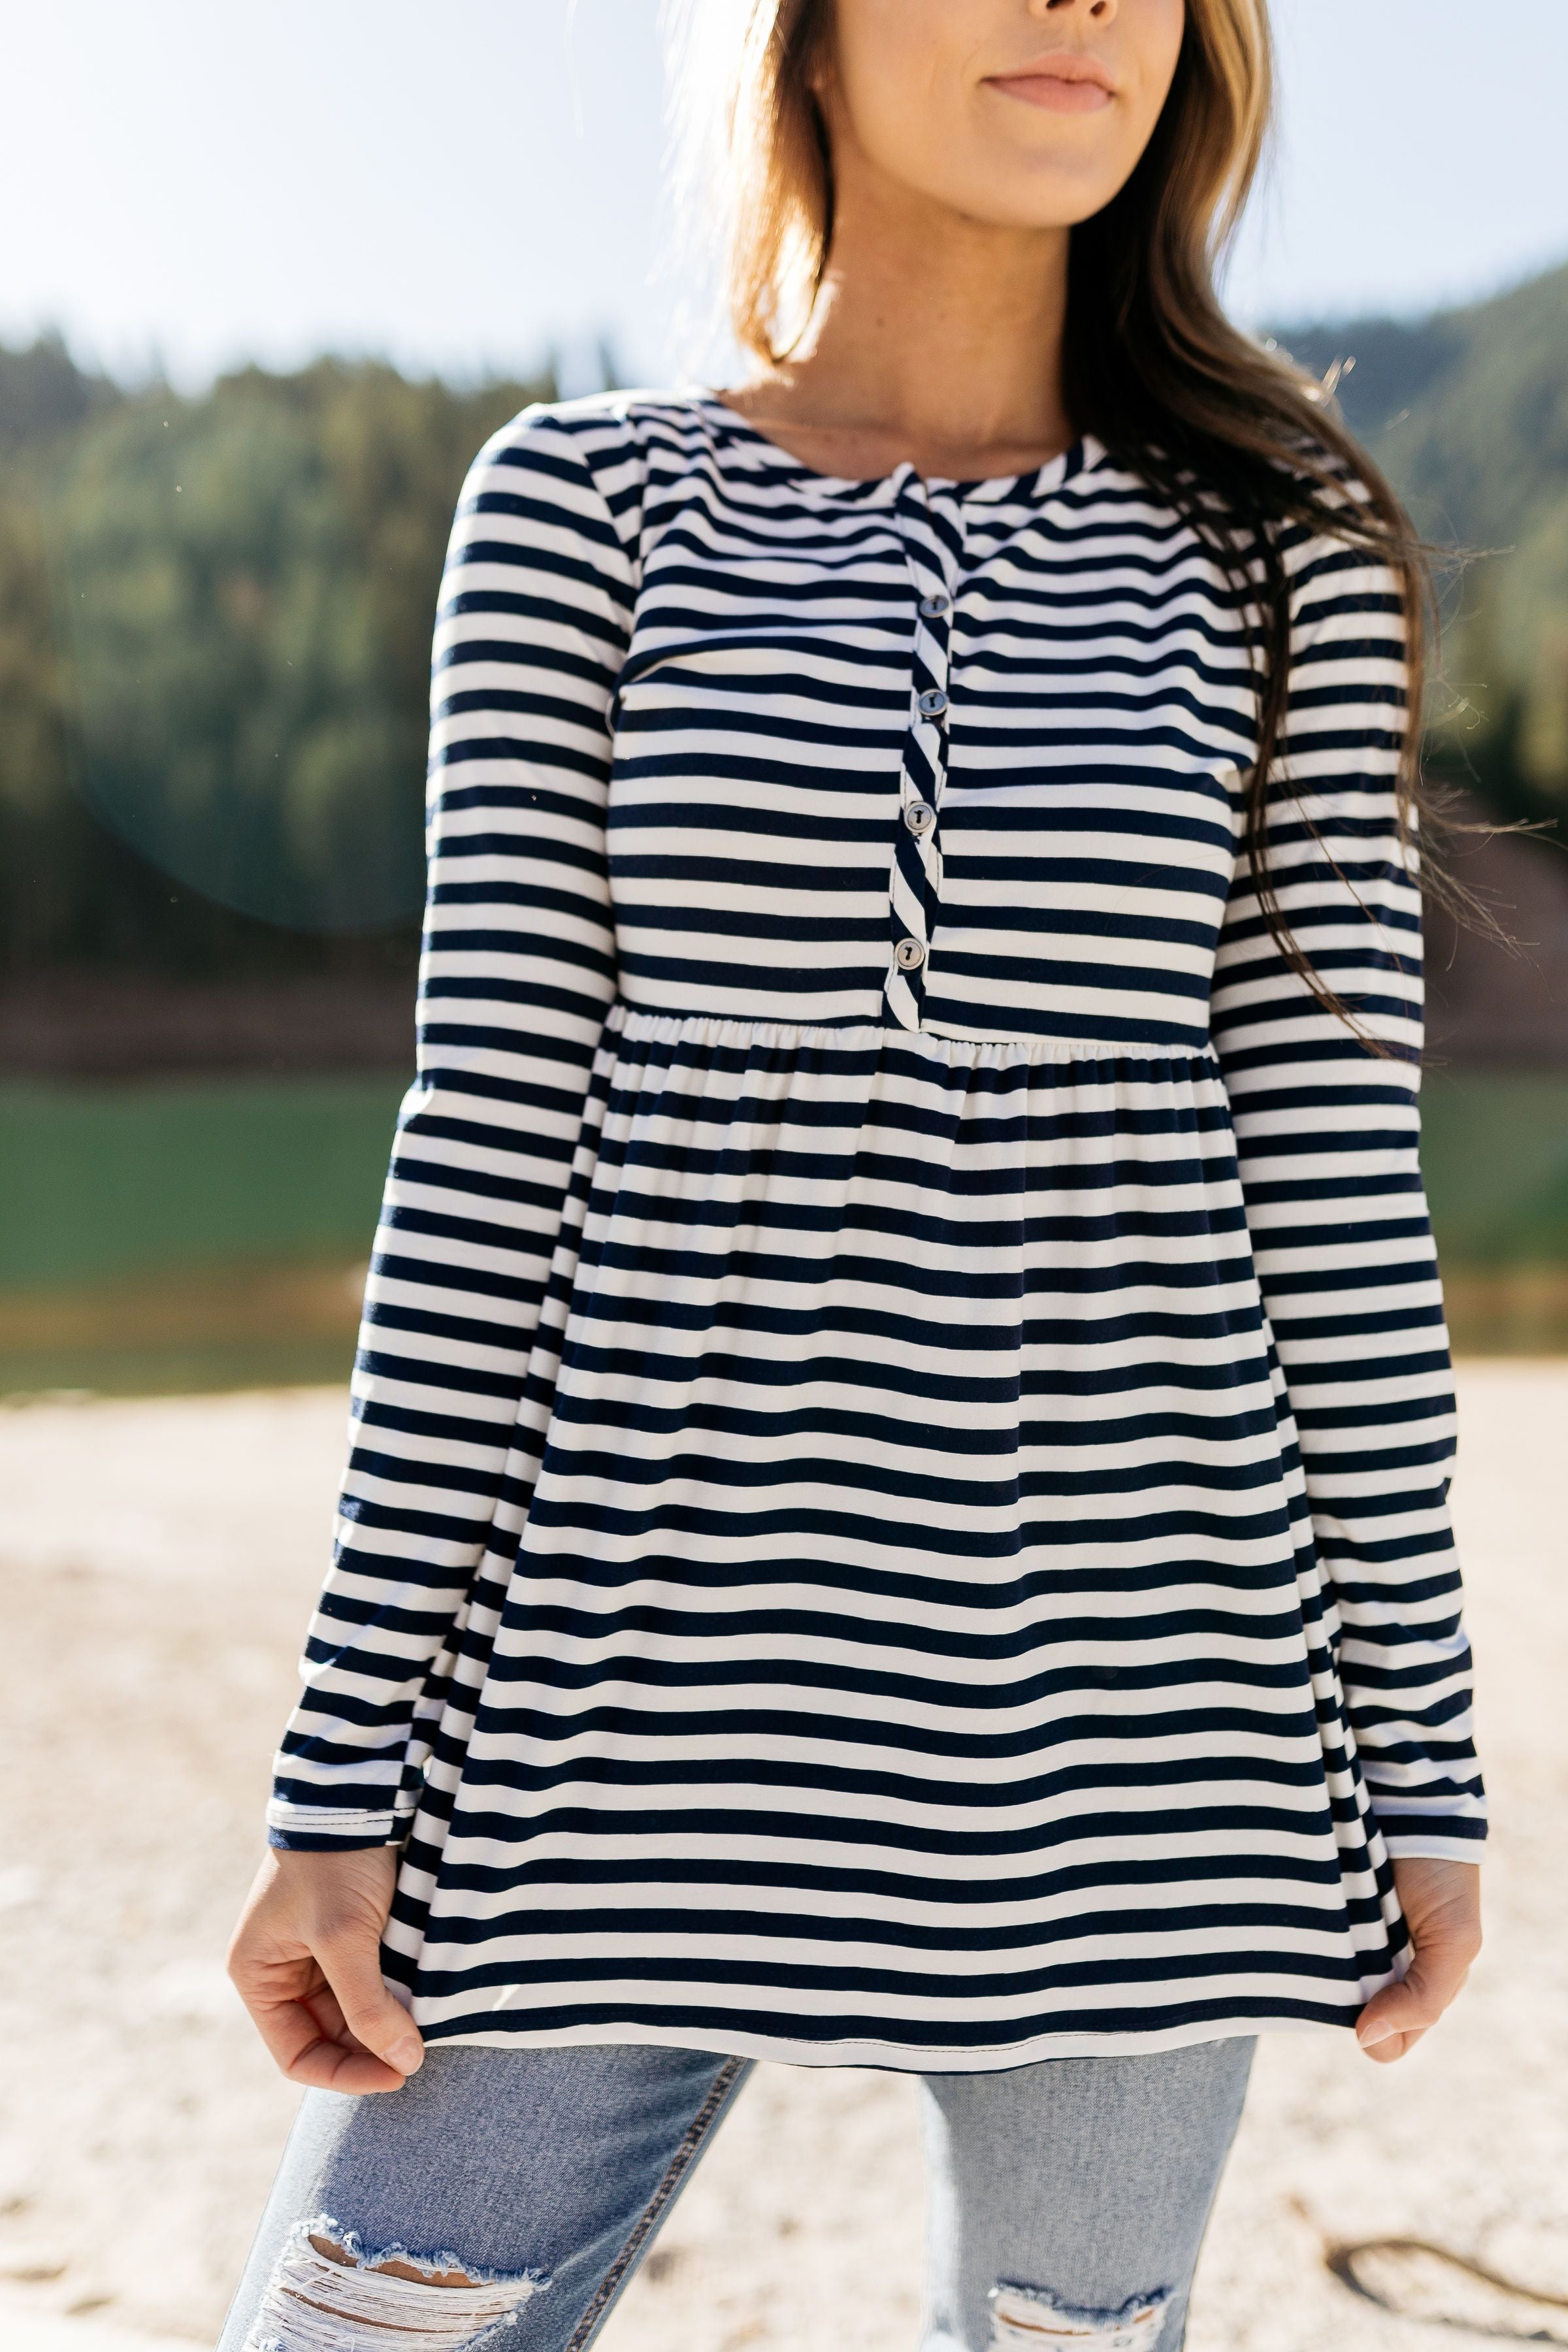 The Sailor Striped Peplum in Navy & White